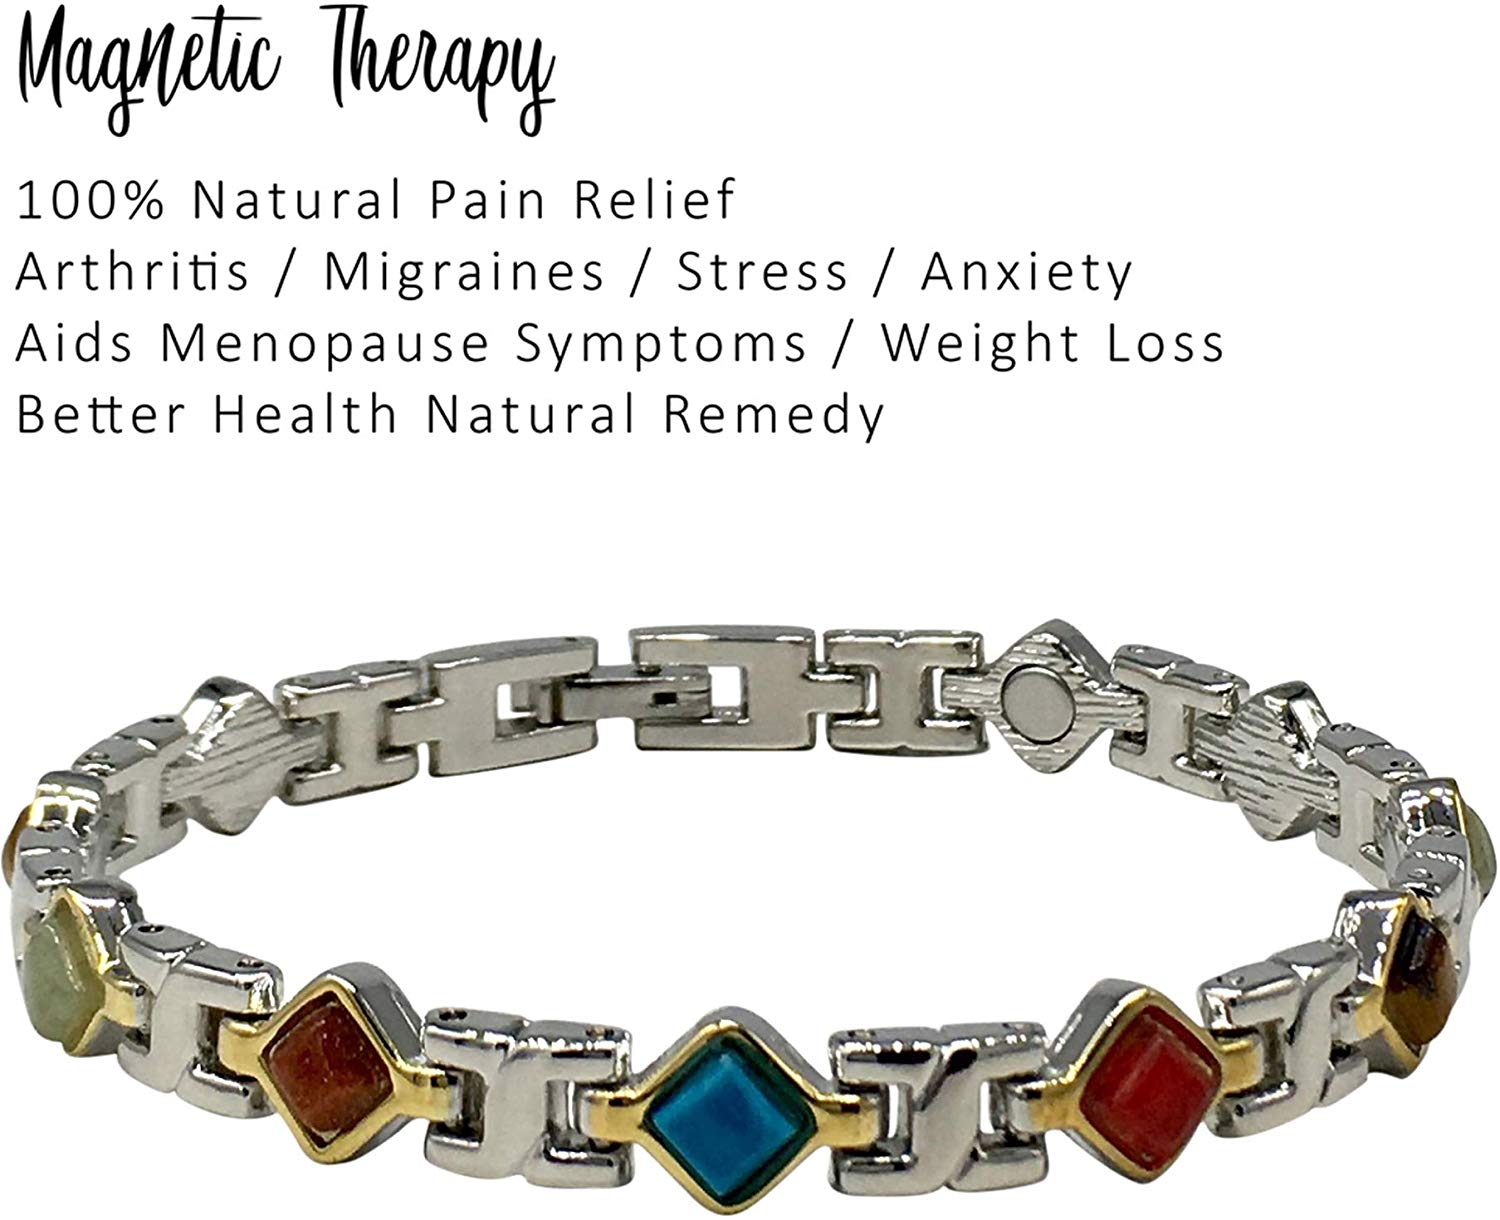 magnetic therapy bracelet for women natural pain relief for arthritis joint pain carpal tunnel relief menopause symptoms hot flushes best gift for women and ladies plus gift box